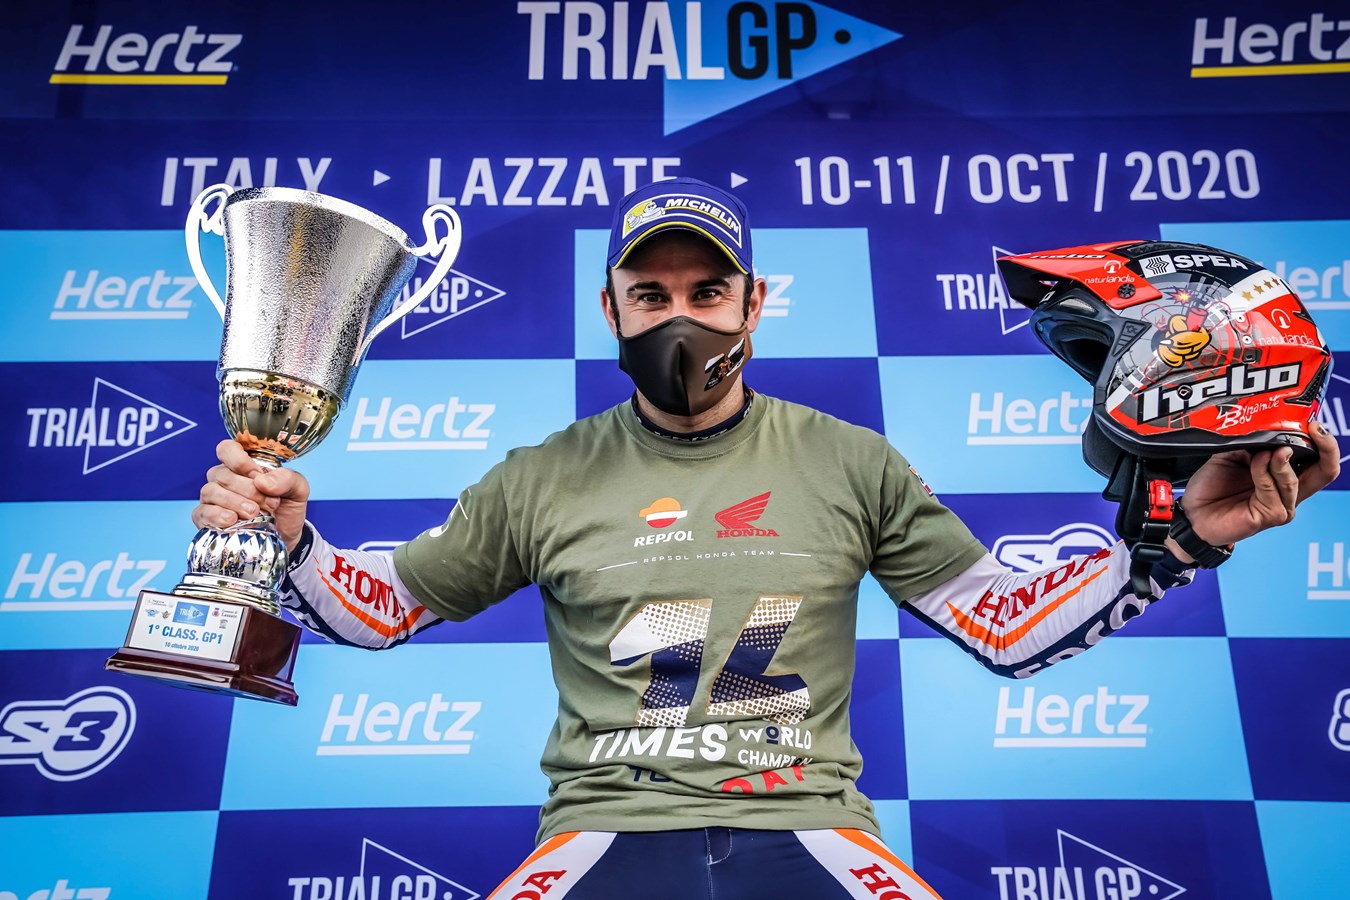 Toni Bou clinches earlier than expected a 28th world championship title at the Italian TrialGP